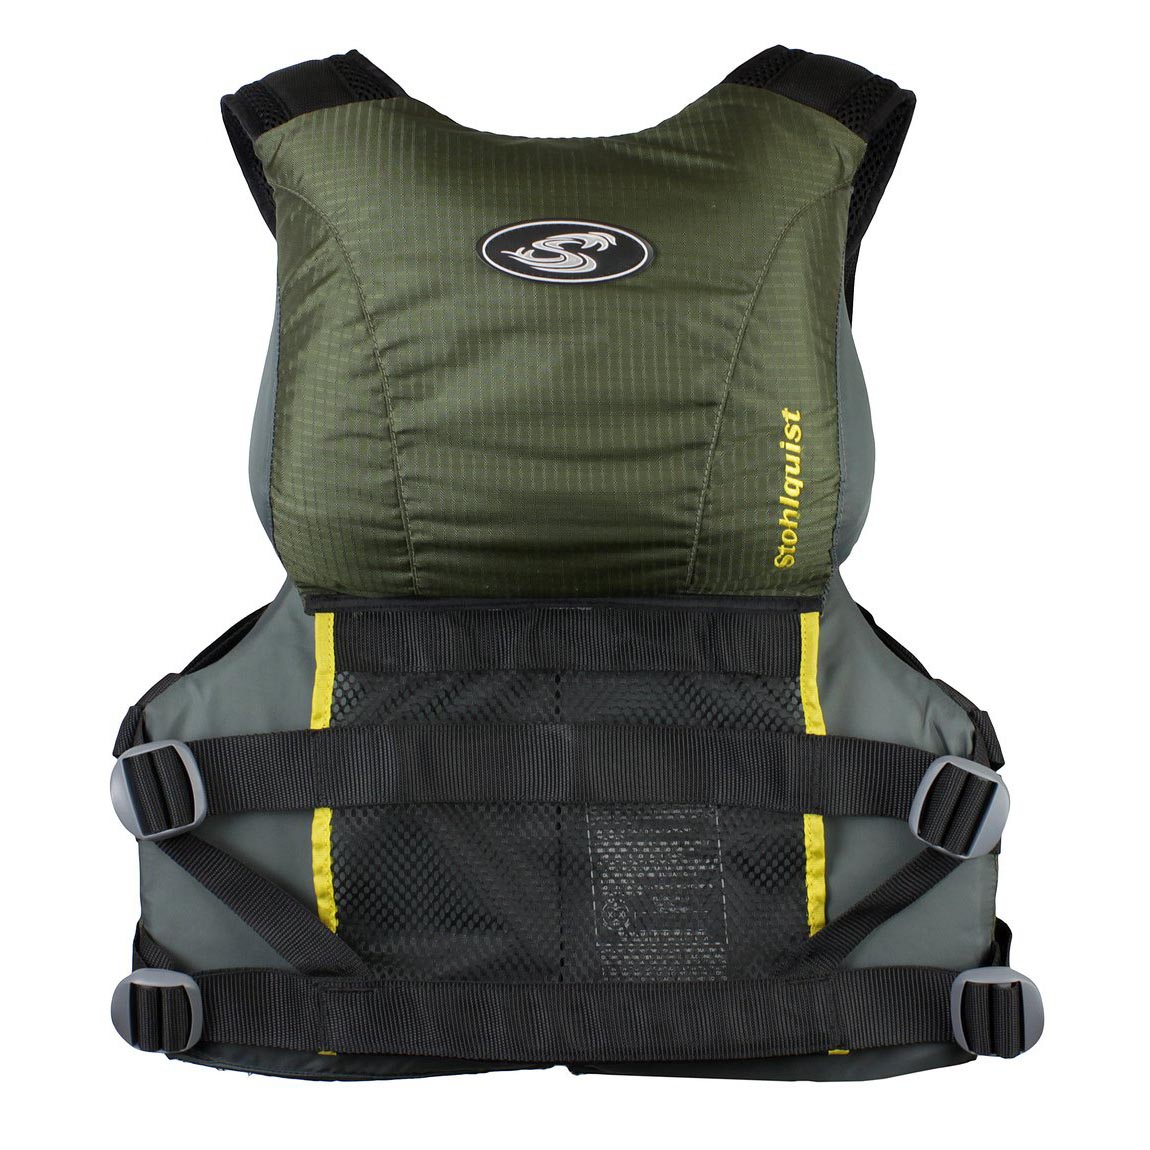 2021) Stohlquist Ebb PFD // Reviews & Best Prices // PaddlingSpace.com